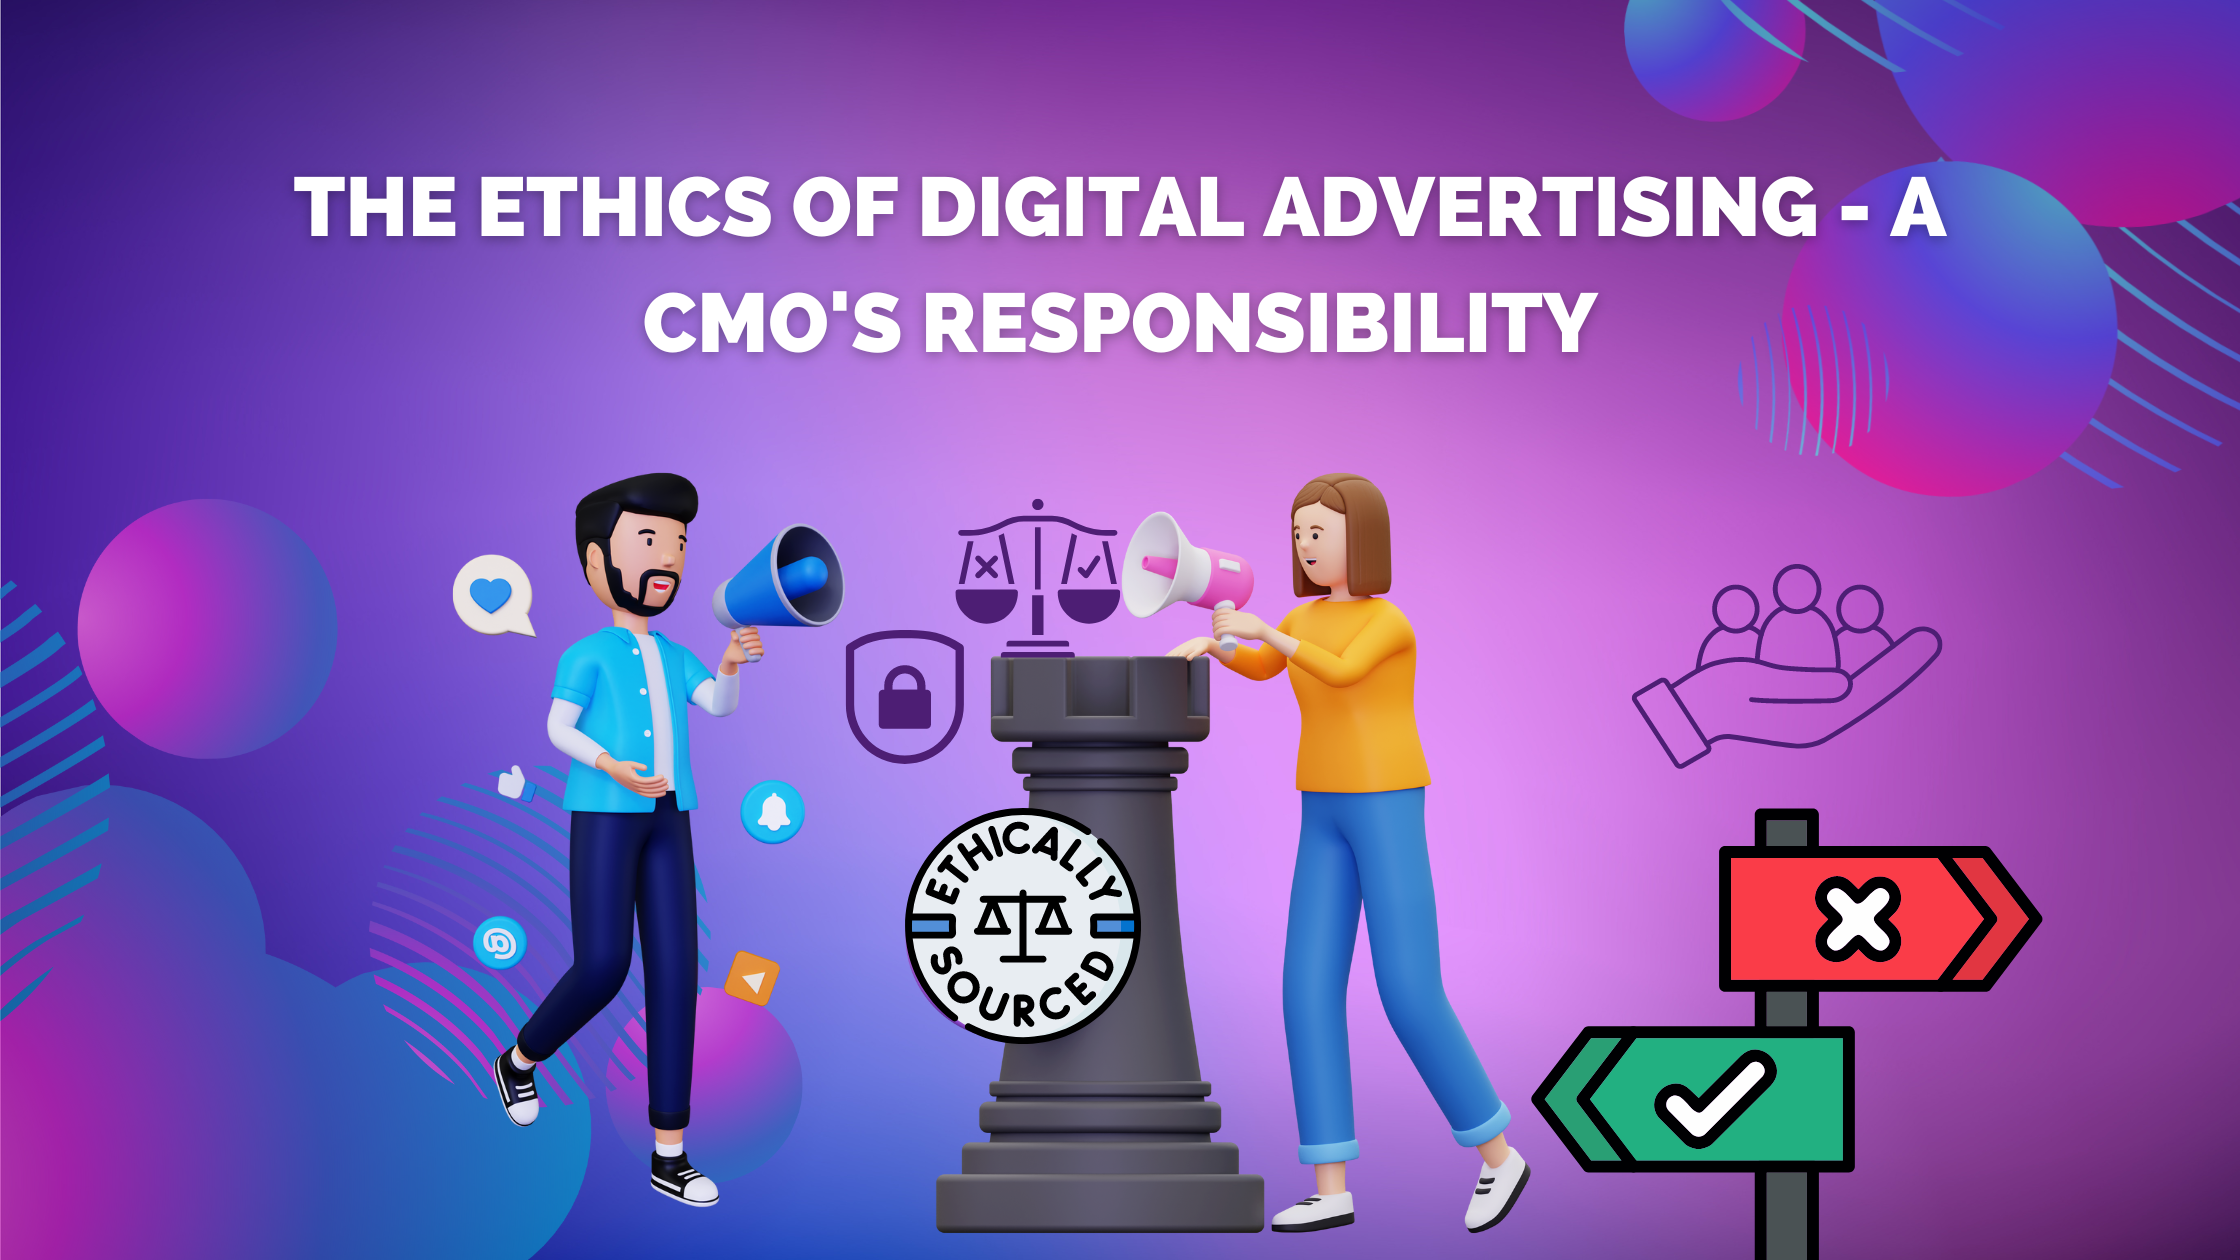 The Ethics of Digital Advertising - A CMO's Responsibility